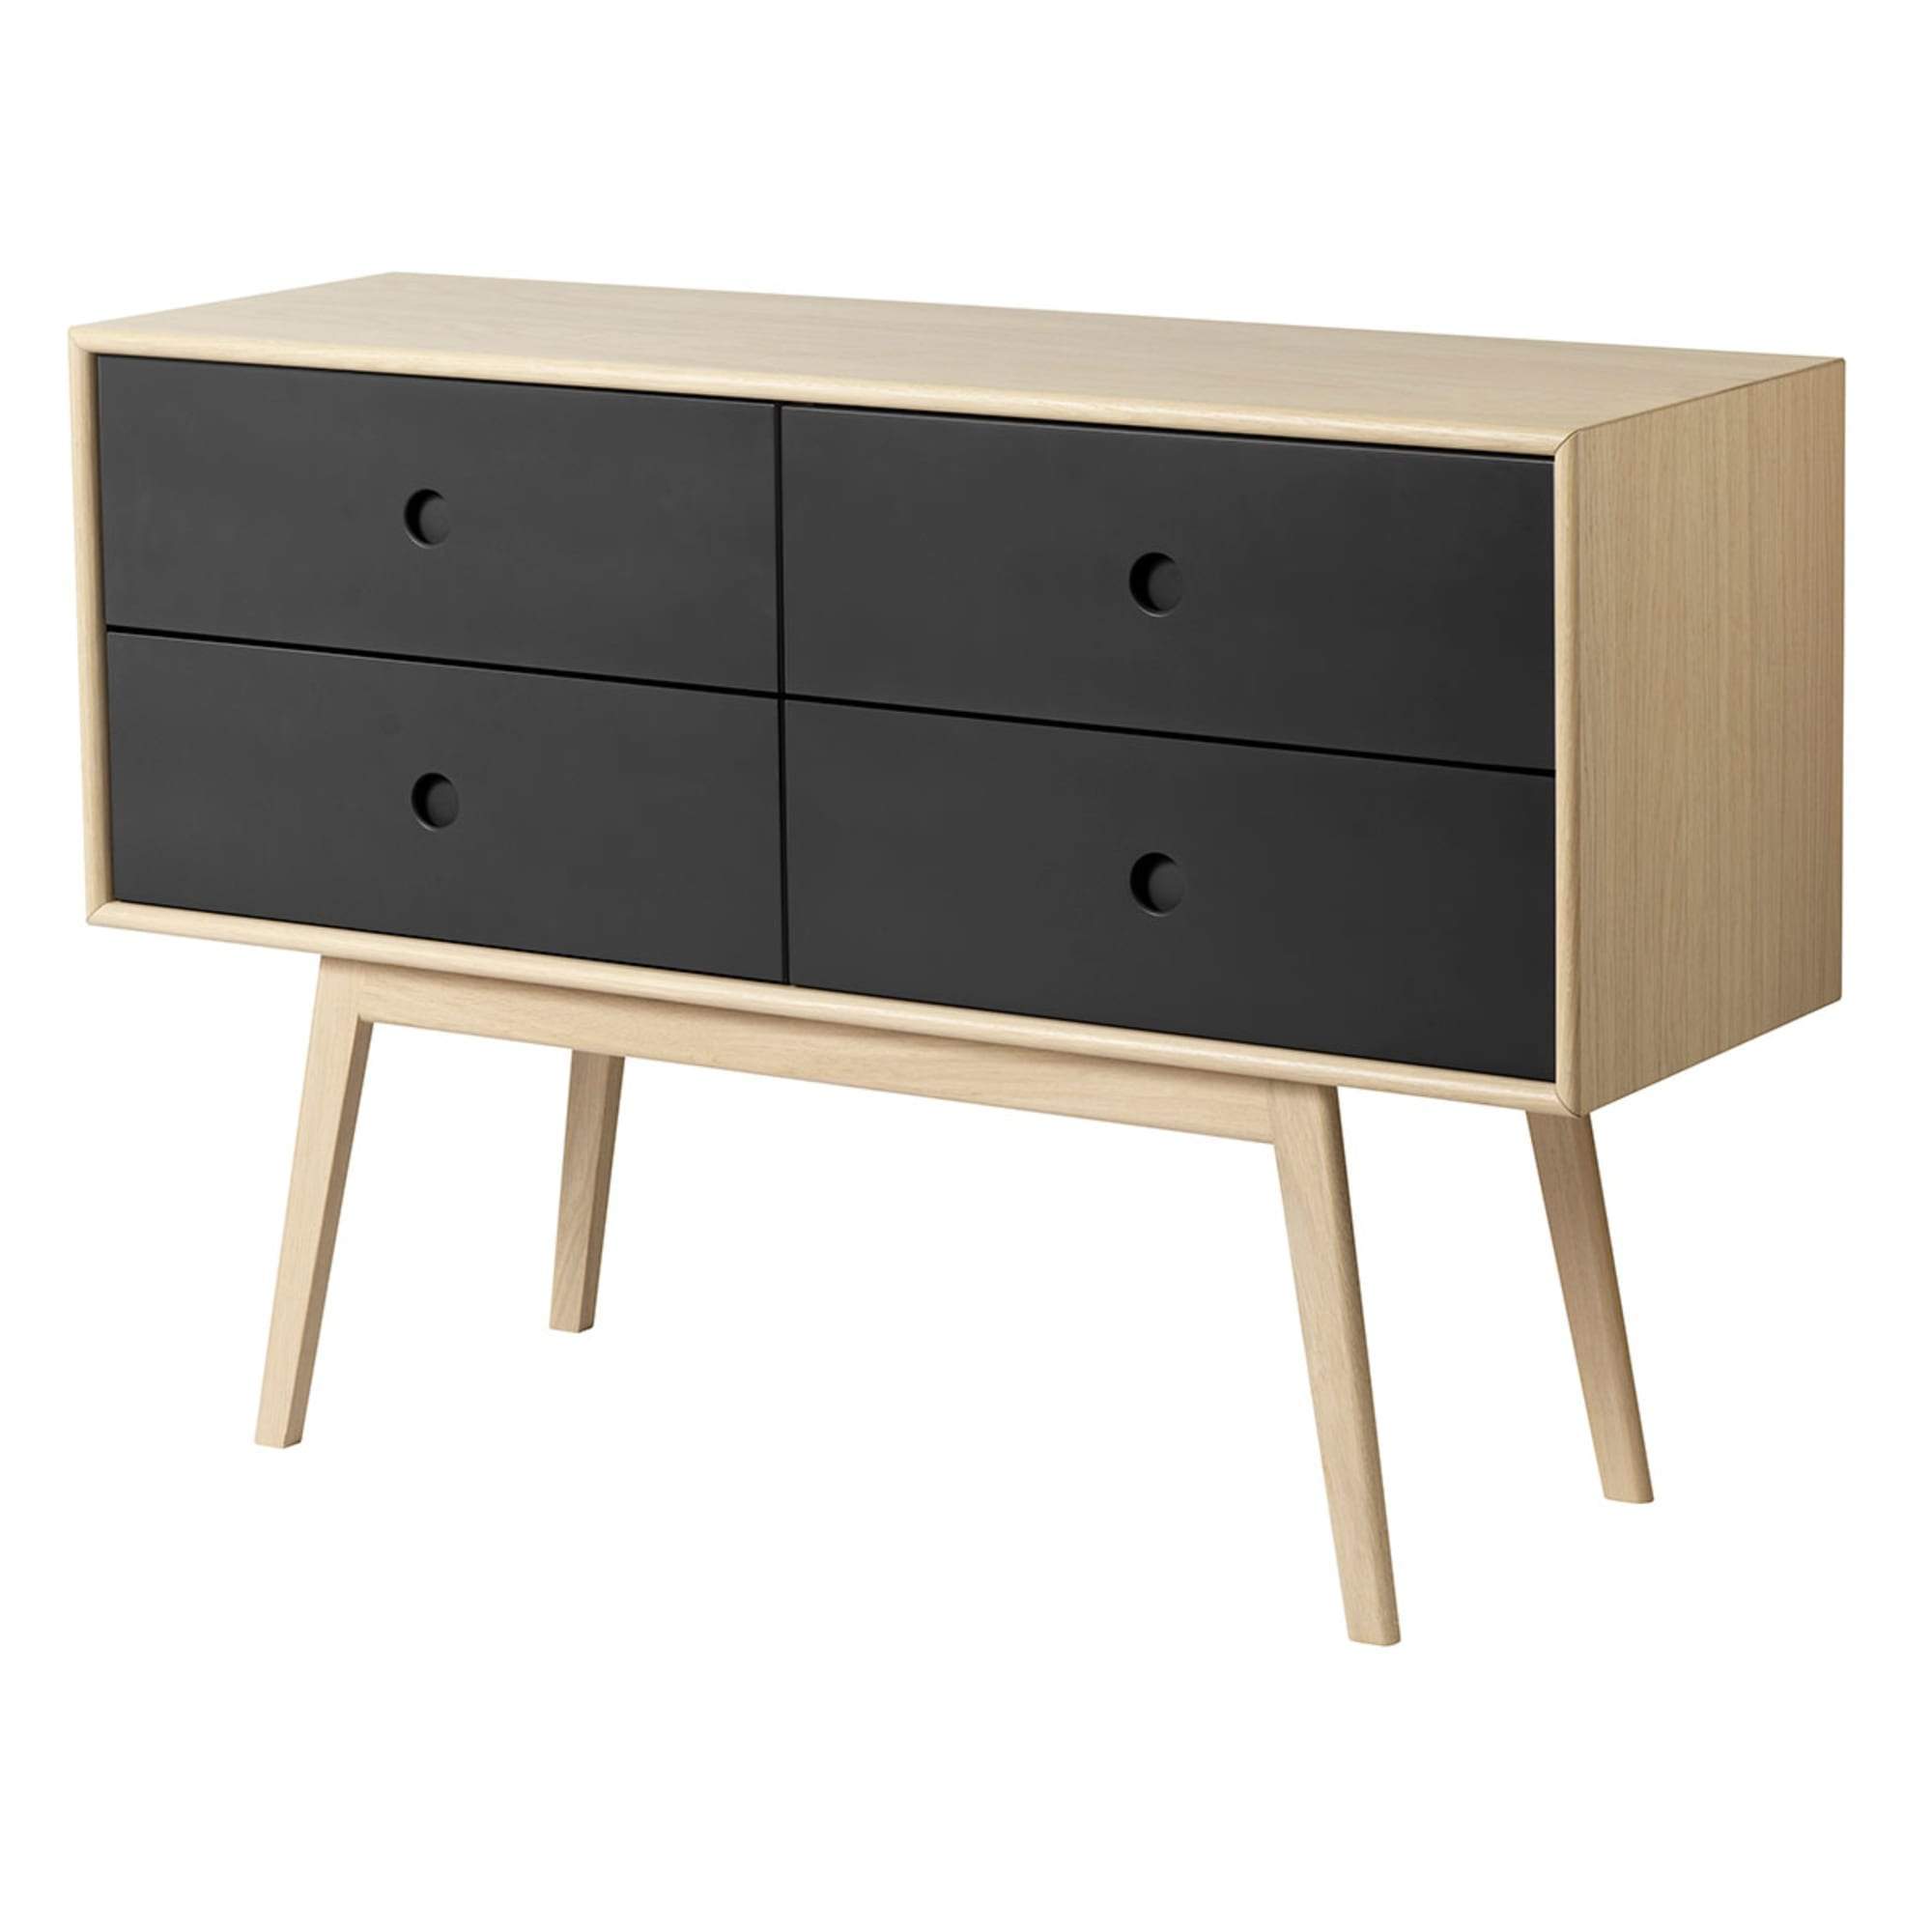 Fdb Møbler F22 Bulter Chest Of Drawers, Black/Natural